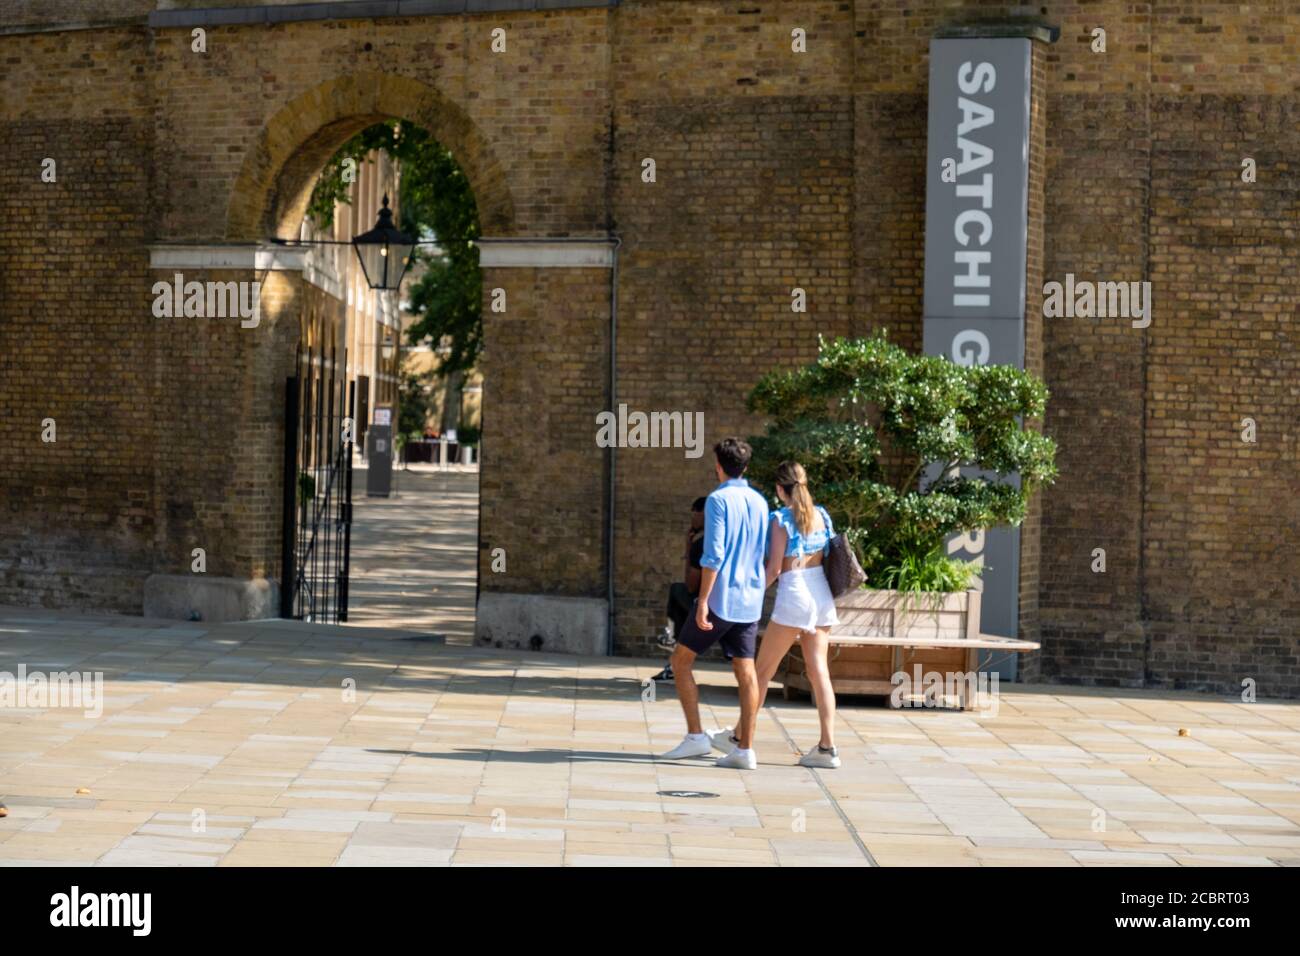 London- August, 2020: Saatchi Gallery entrance, a contemporary art gallery on the Kings Road in Chelsea Stock Photo